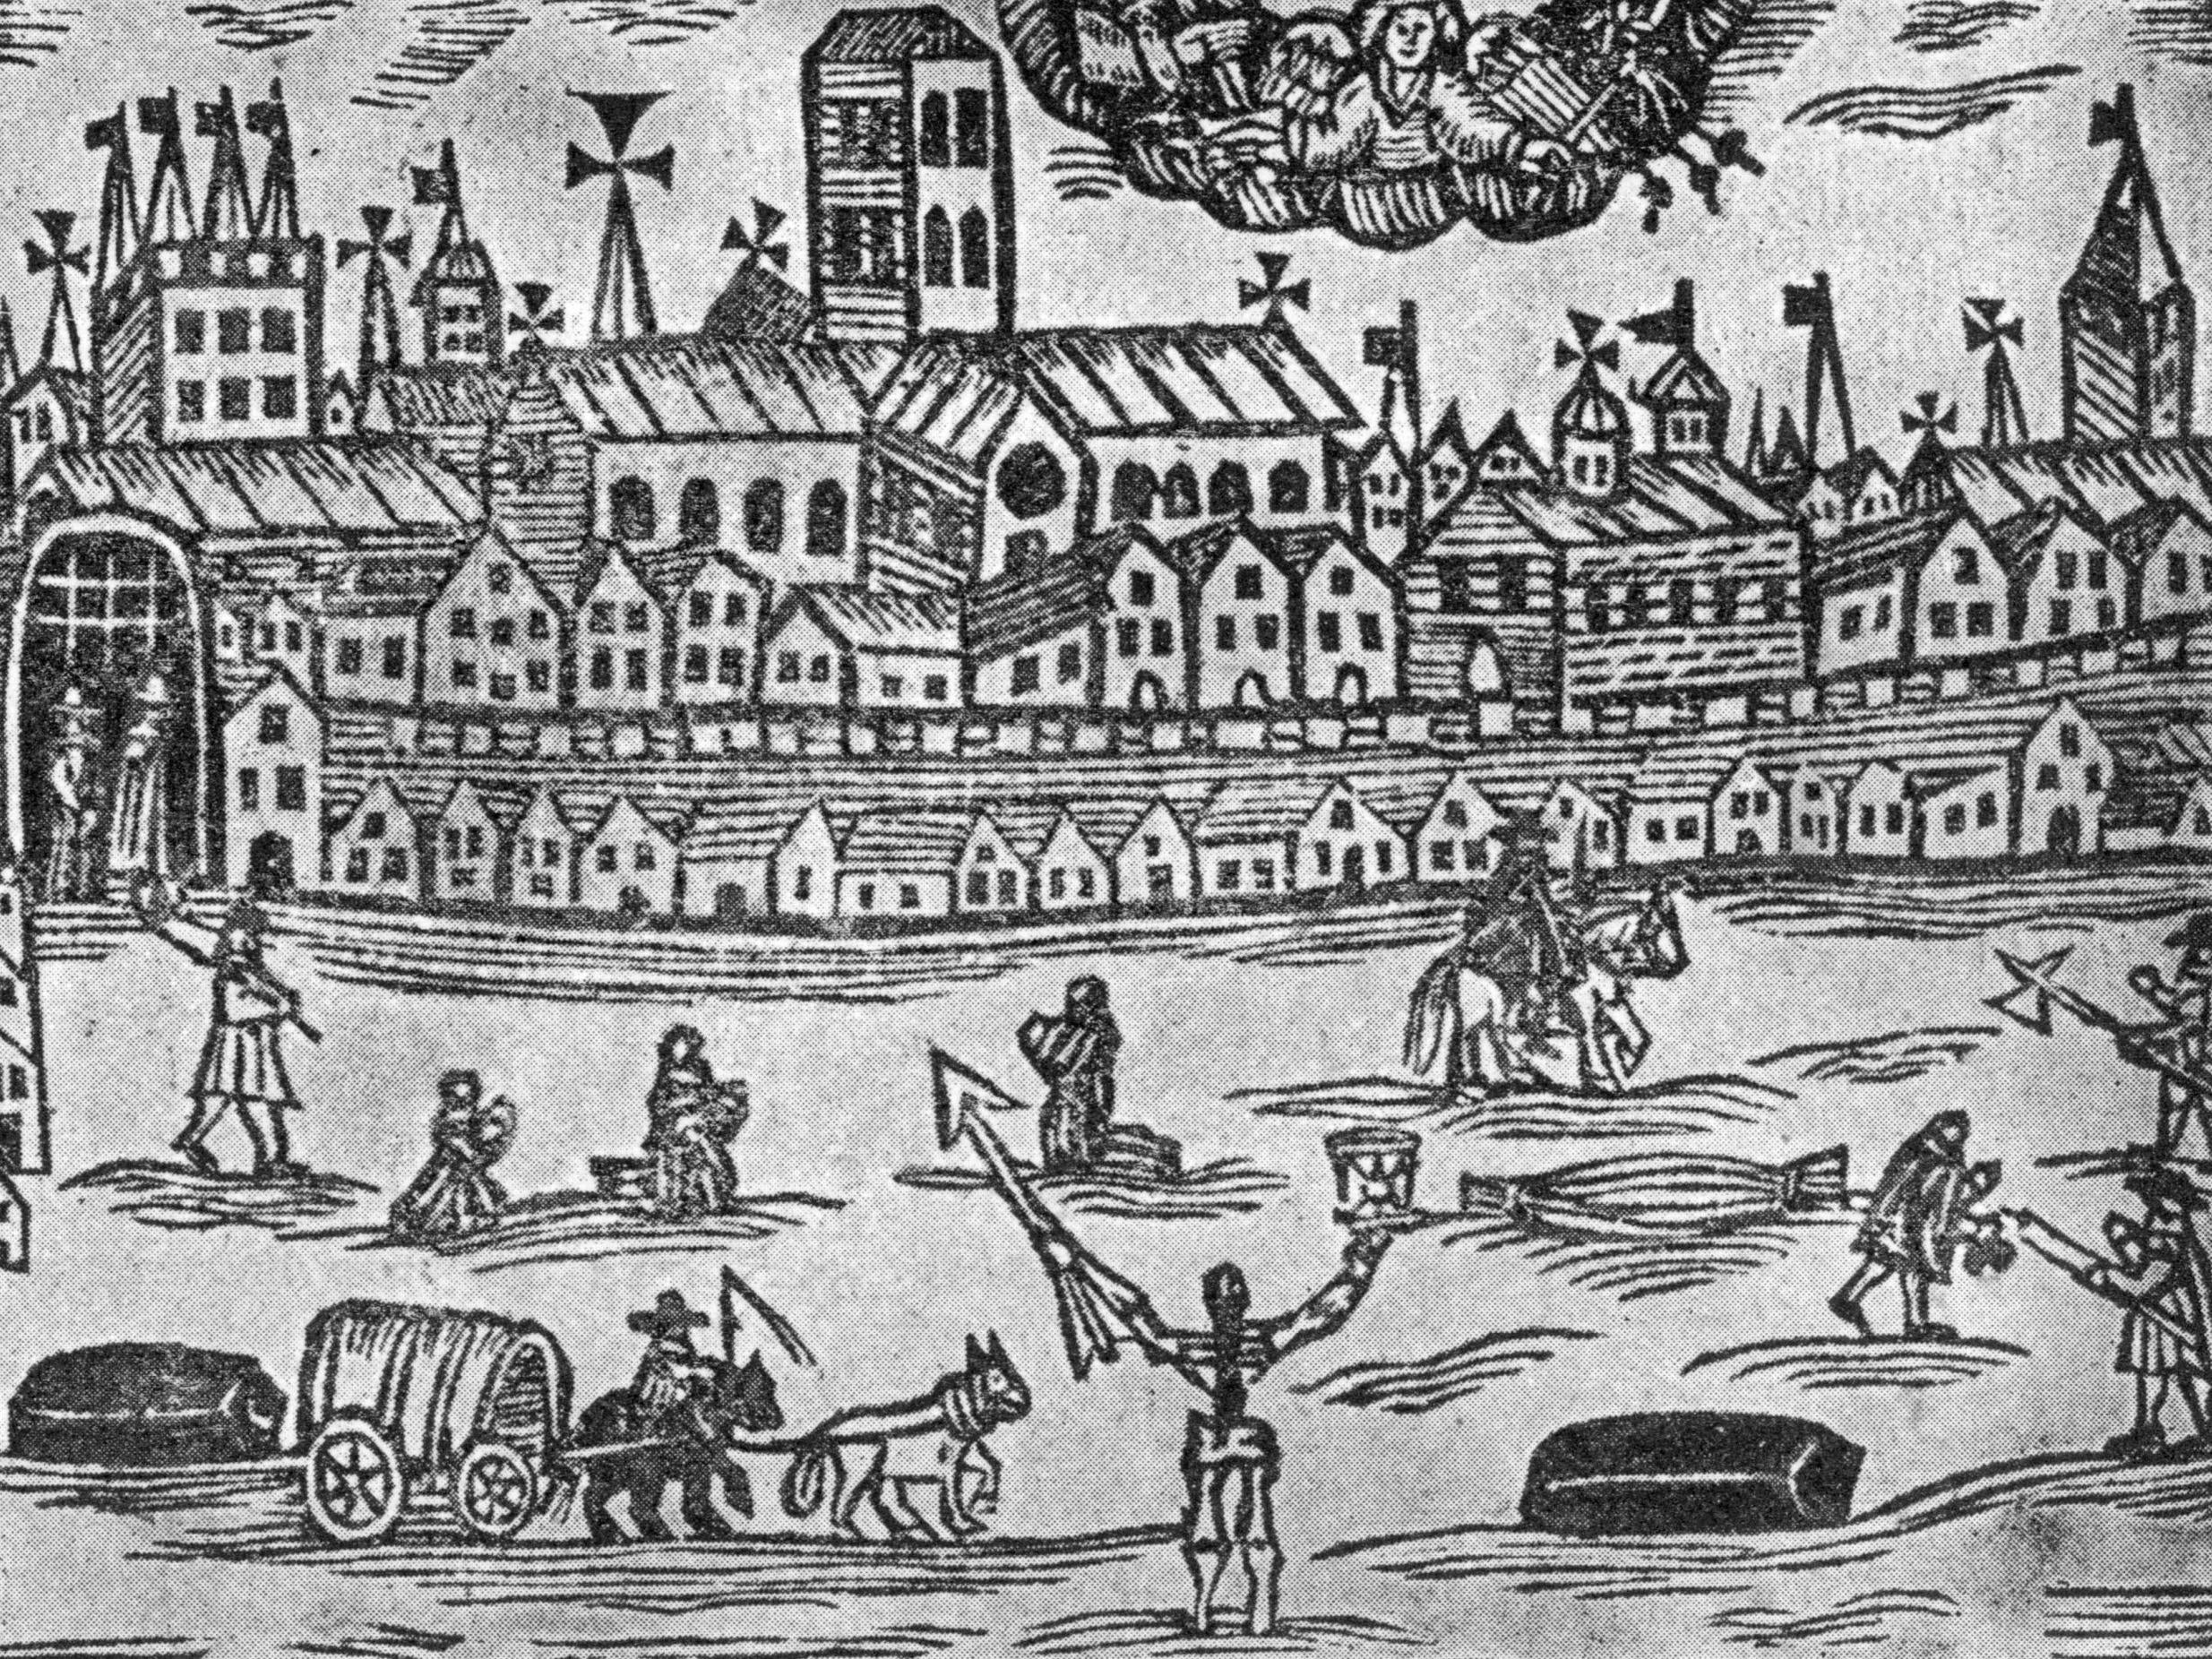 The angel of death presides over London during the Great Plague of 1665-1666